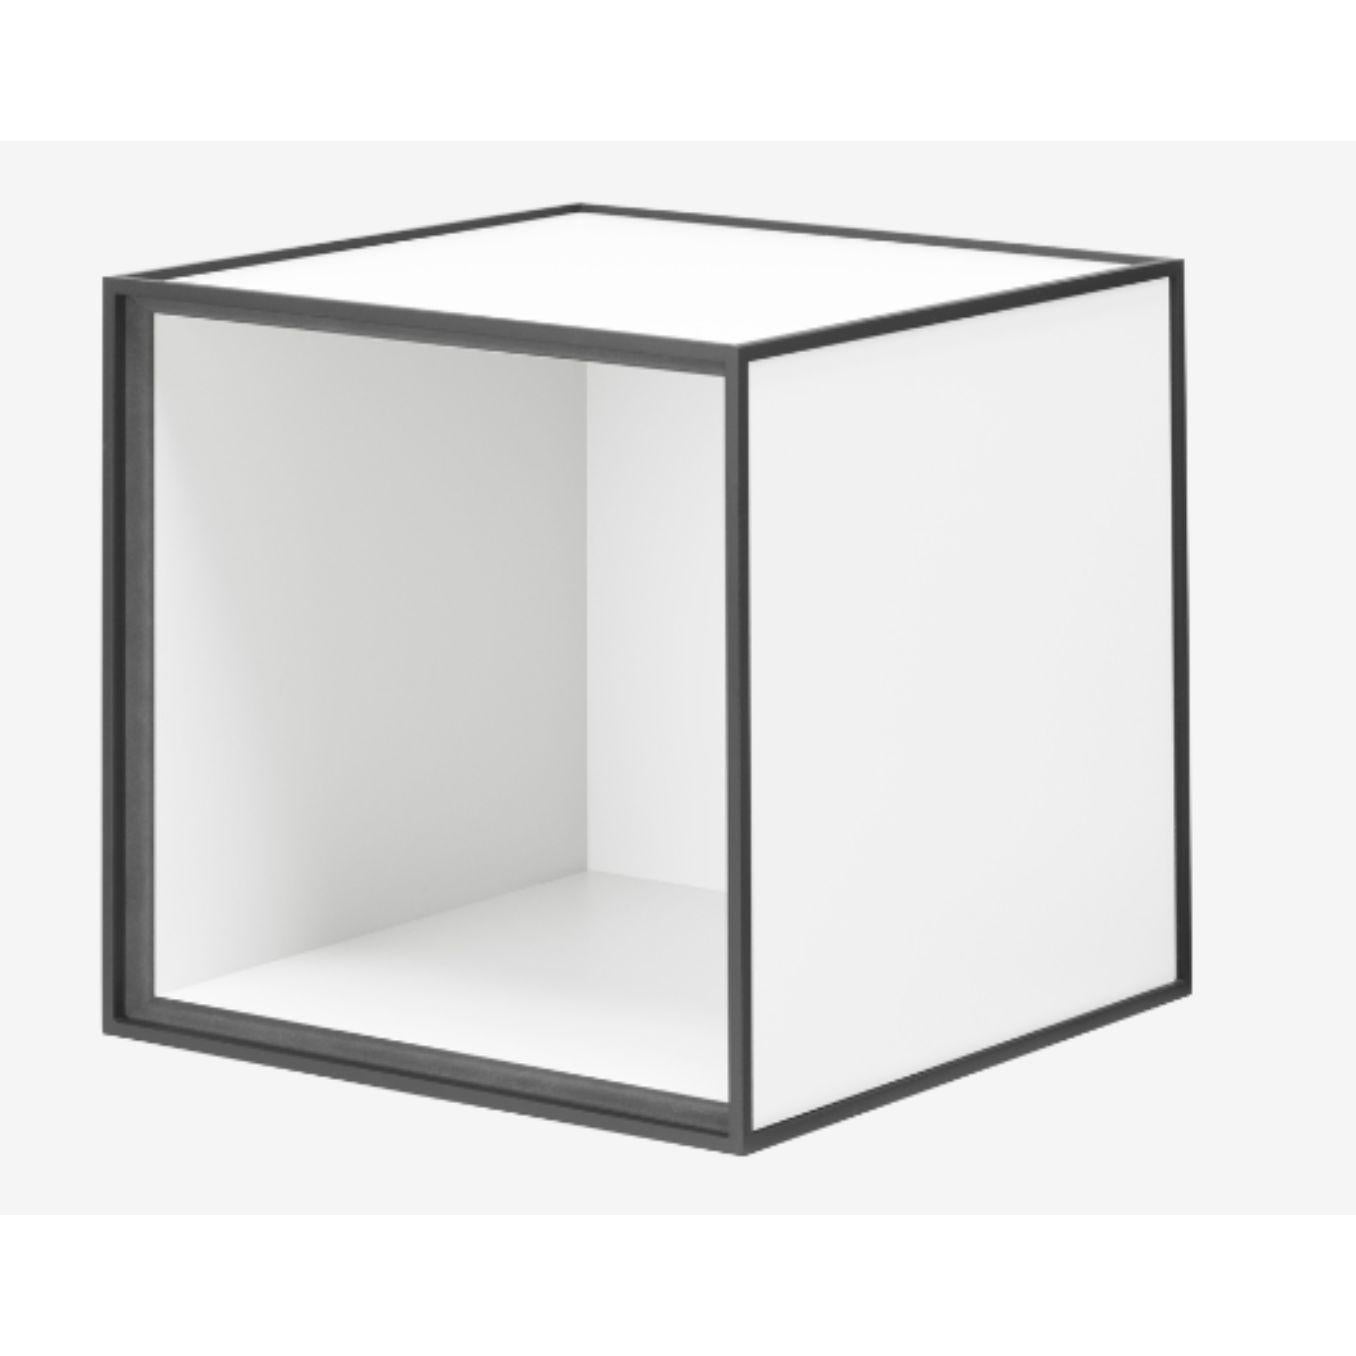 35 white frame box by Lassen
Dimensions: W 35 x D 35 x H 35 cm 
Materials: Finér, Melamin, Melamin, Melamine, Metal, Veneer, Oak
Also available in different colors and dimensions. 

By Lassen is a Danish design brand focused on iconic designs